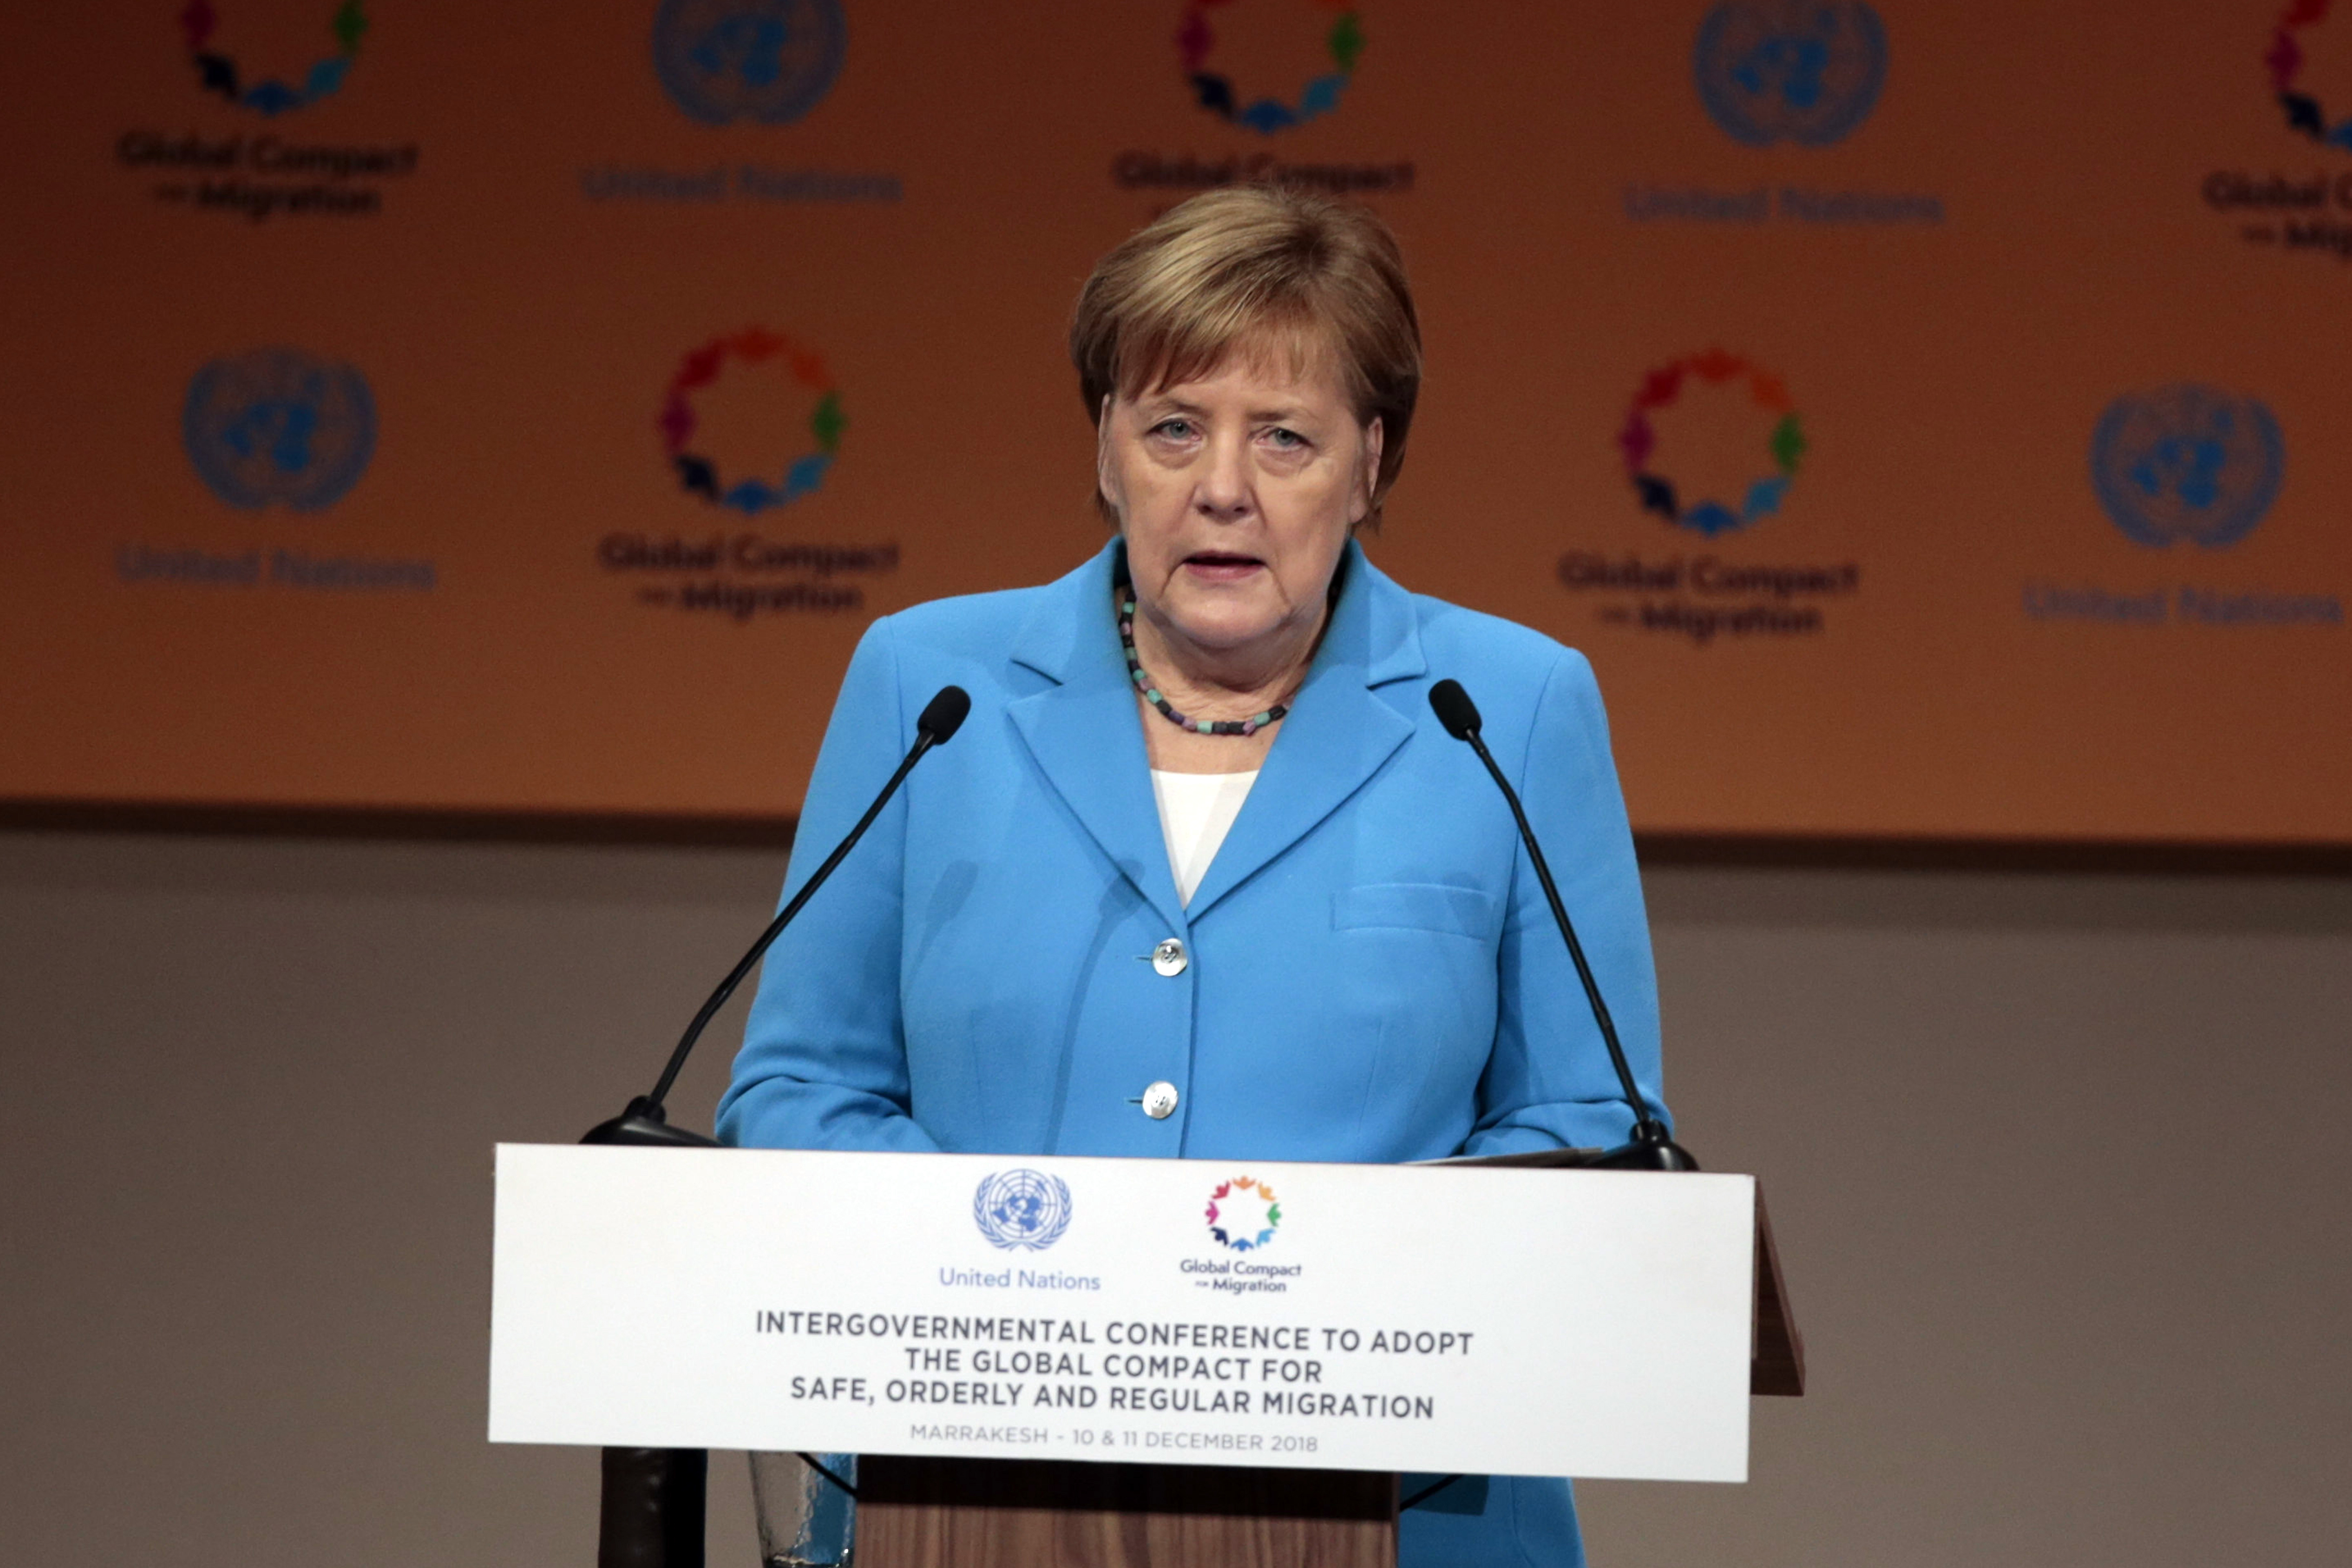 German Chancellor Angela Merkel addresses delegates during the opening session of a UN Migration Conference in Marrakech, Morocco, Monday, Dec.10, 2018. Top U.N. officials and government leaders from about 150 countries are uniting around an agreement on migration, while finding themselves on the defensive about the non-binding deal amid criticism and a walkout from the United States and some other countries. (AP Photo/Mosa'ab Elshamy)